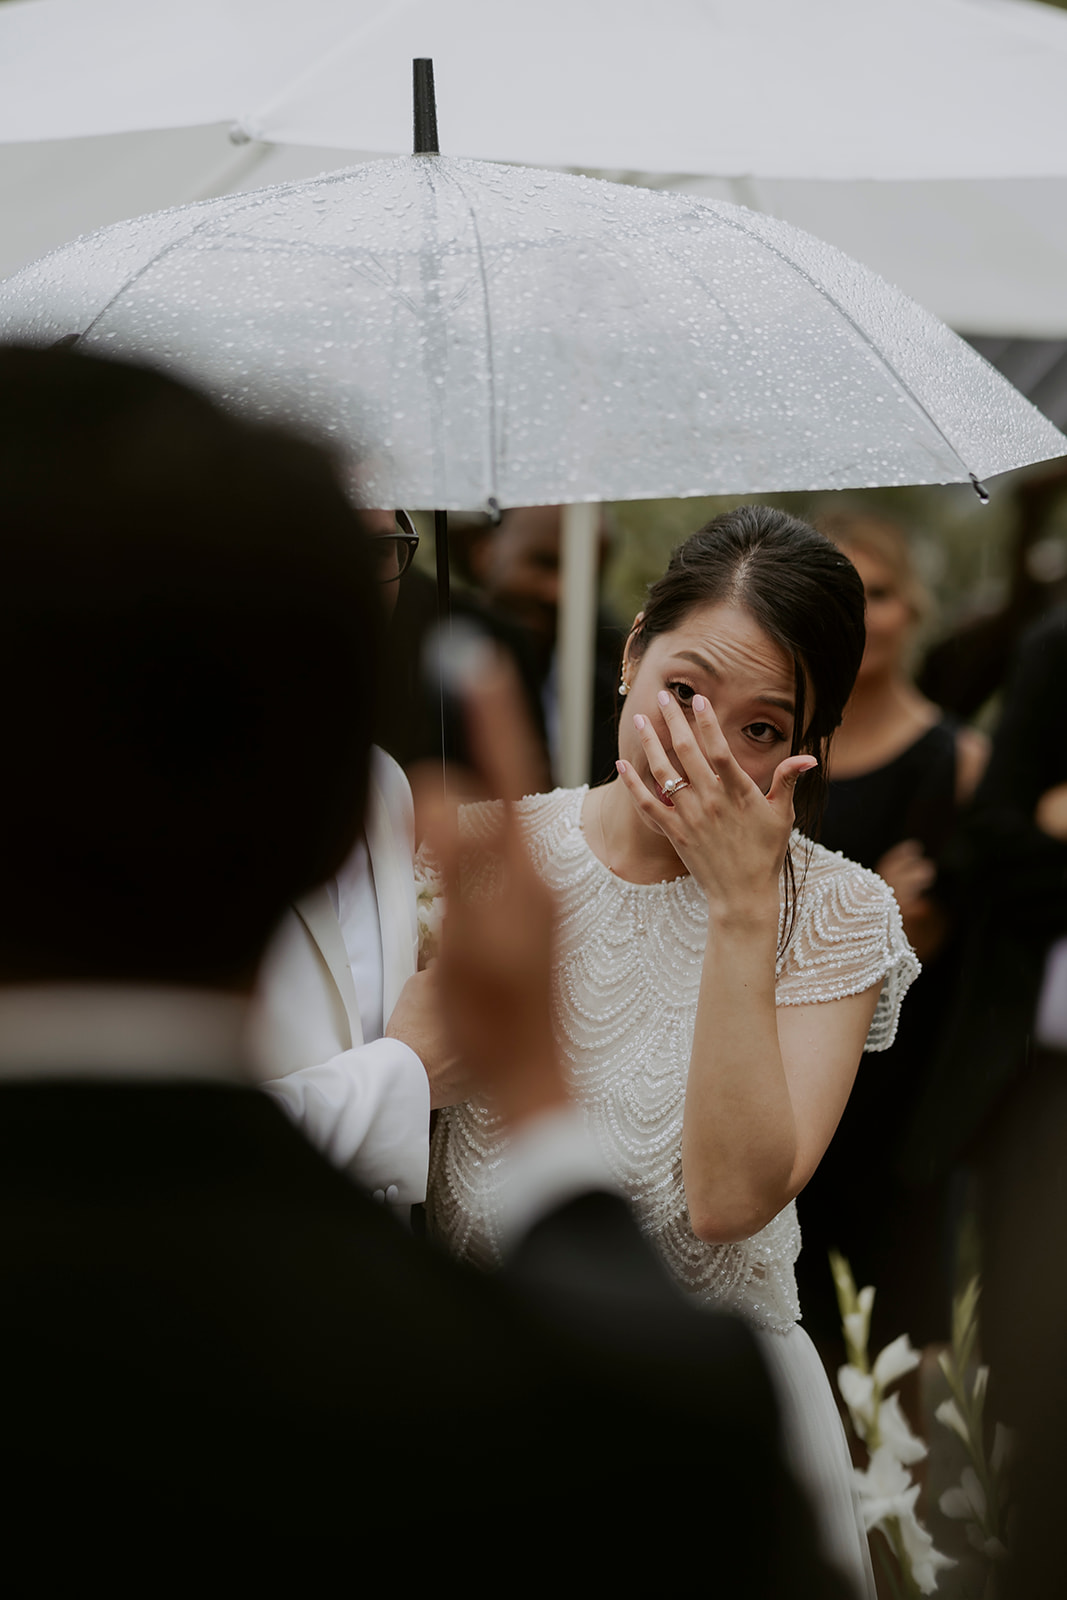 A hanok bride is crying while holding an umbrella in the rain.